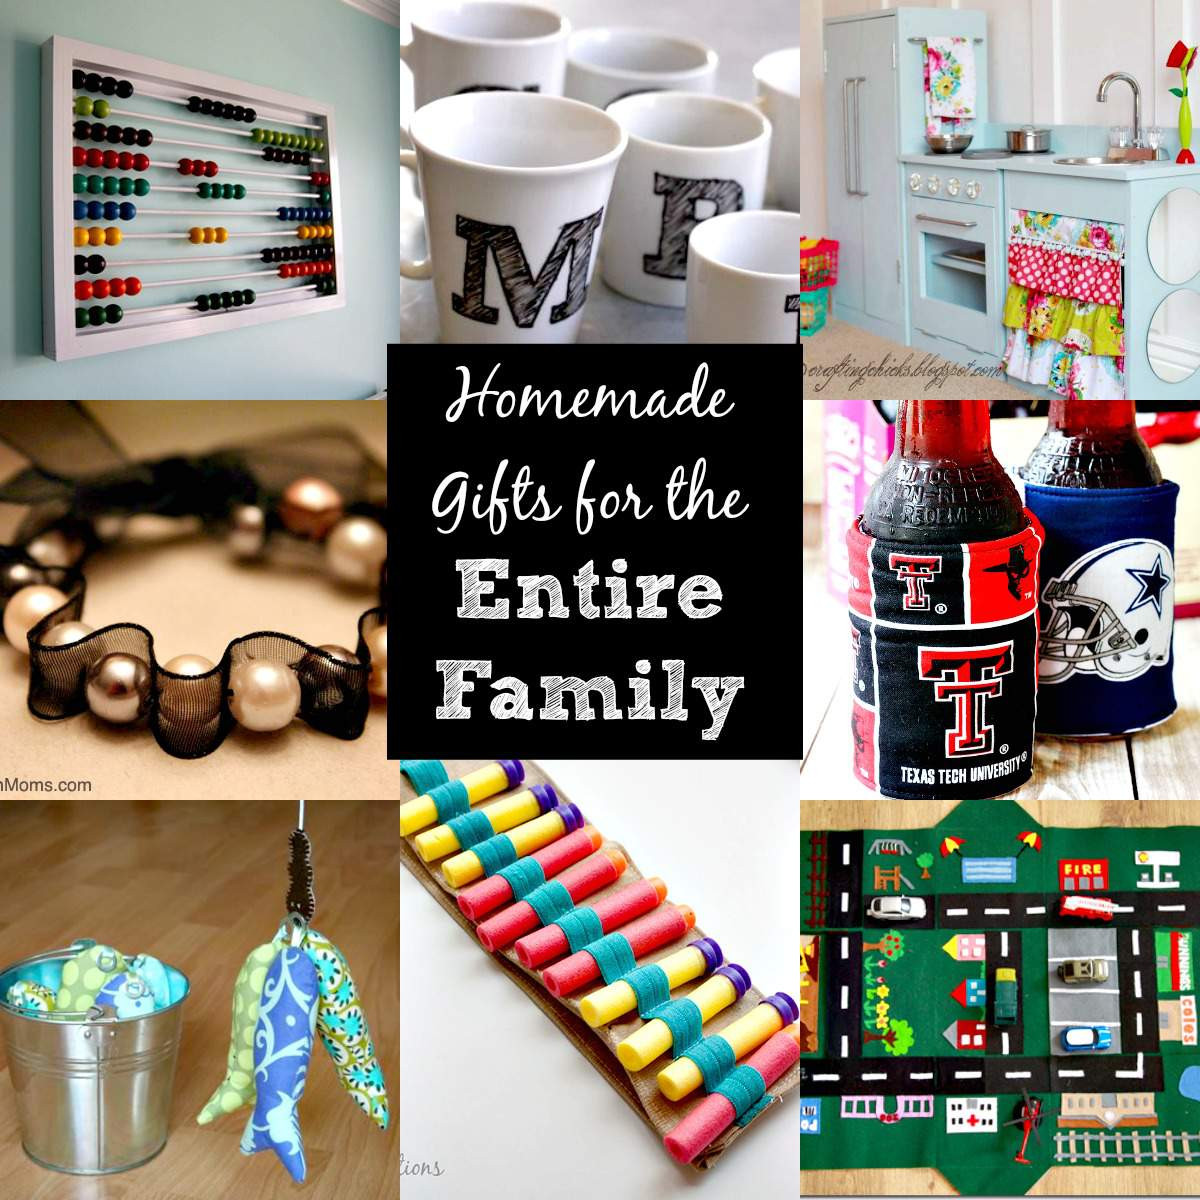 Holiday Gift Ideas Family
 DIY Christmas Gift Ideas for the Entire Family – over 30